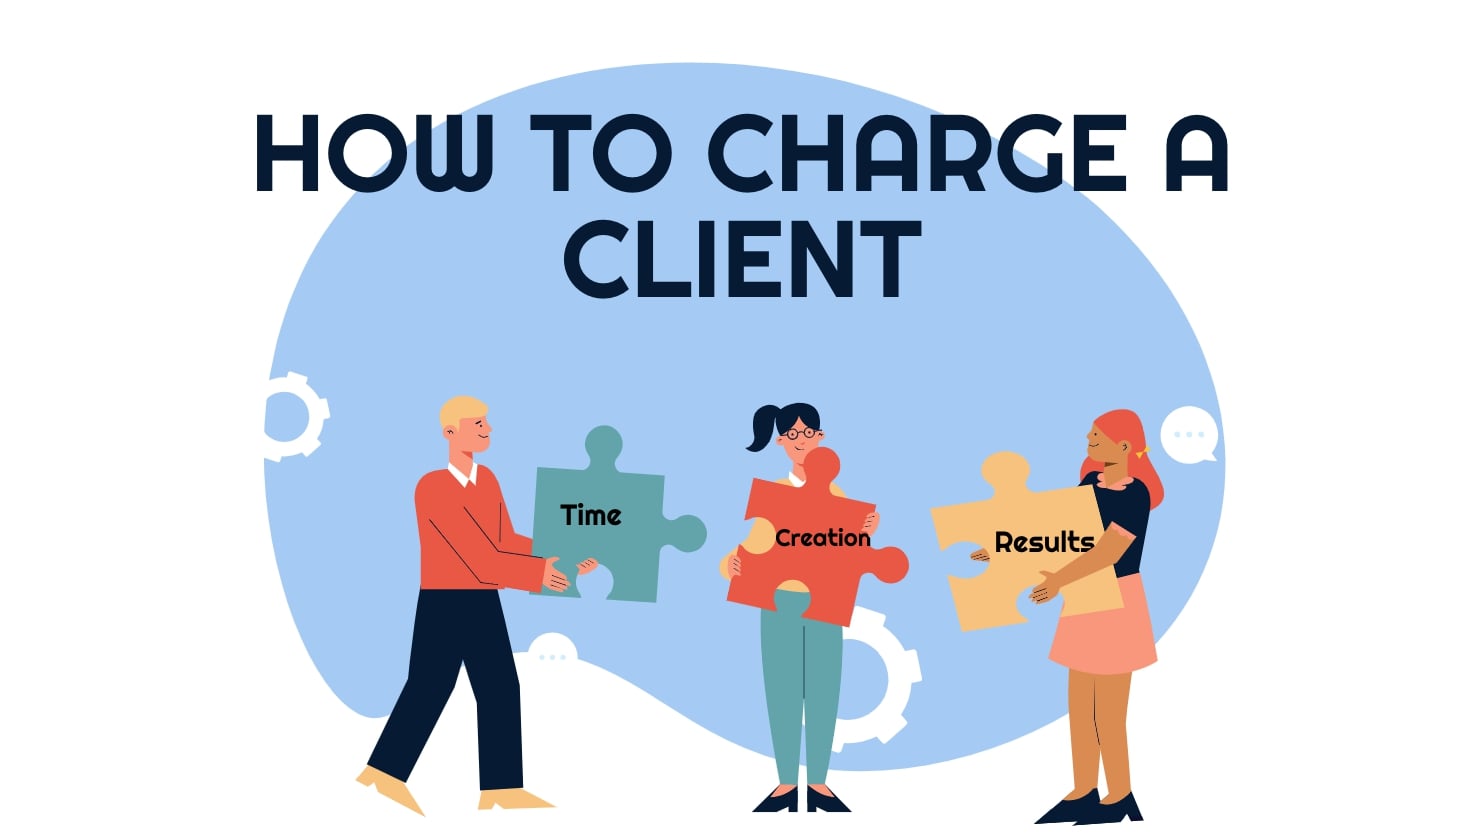 How-To-Charge-A-Client-Kenny-Soto